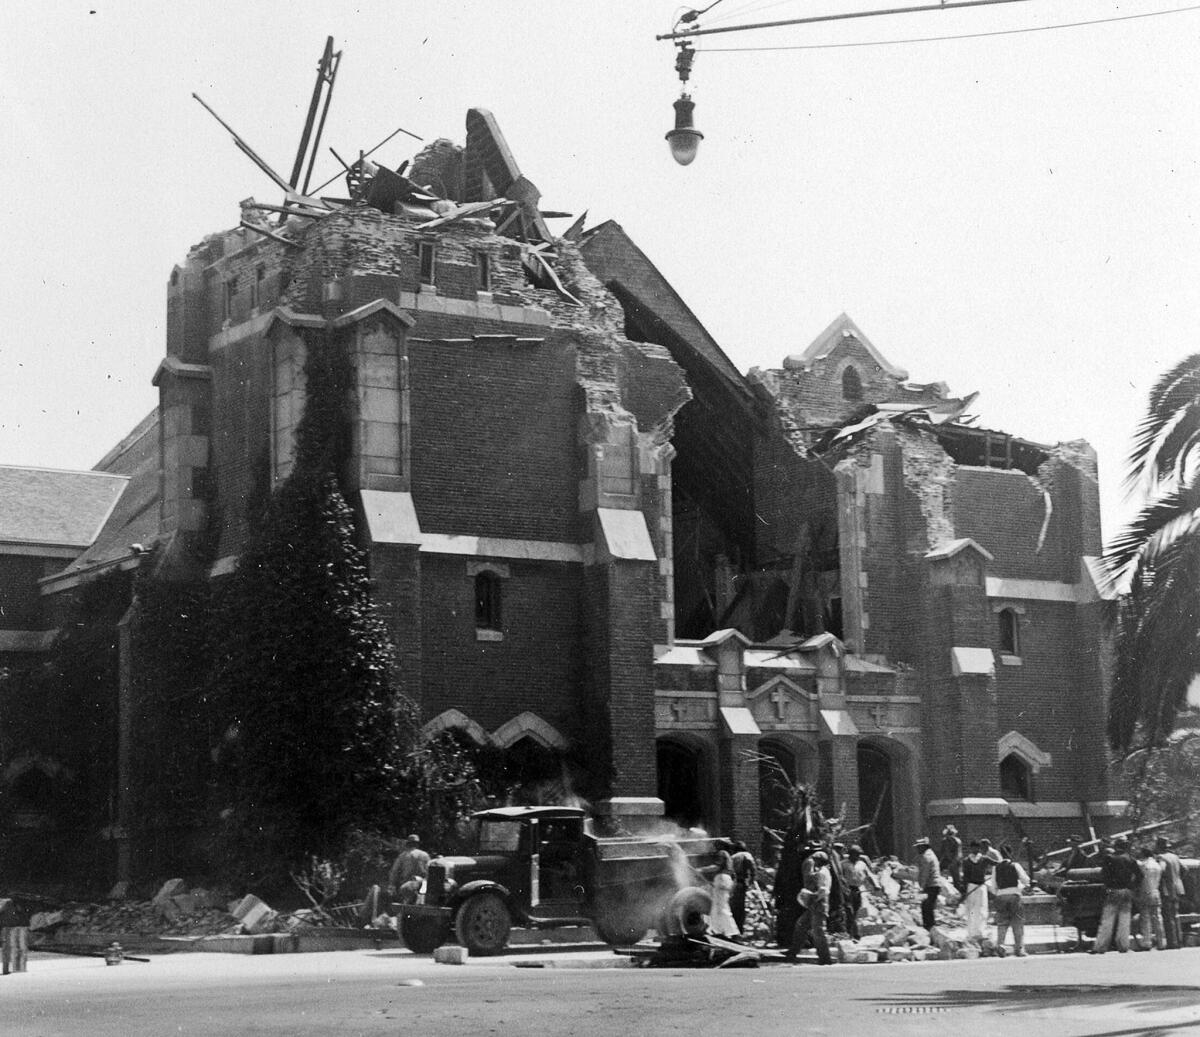 The ruins of St. Anthony's Church in Long Beach, Calif., after a massive earthquake struck on March 10, 1933. (Spencer Weiner / Los Angeles Times)